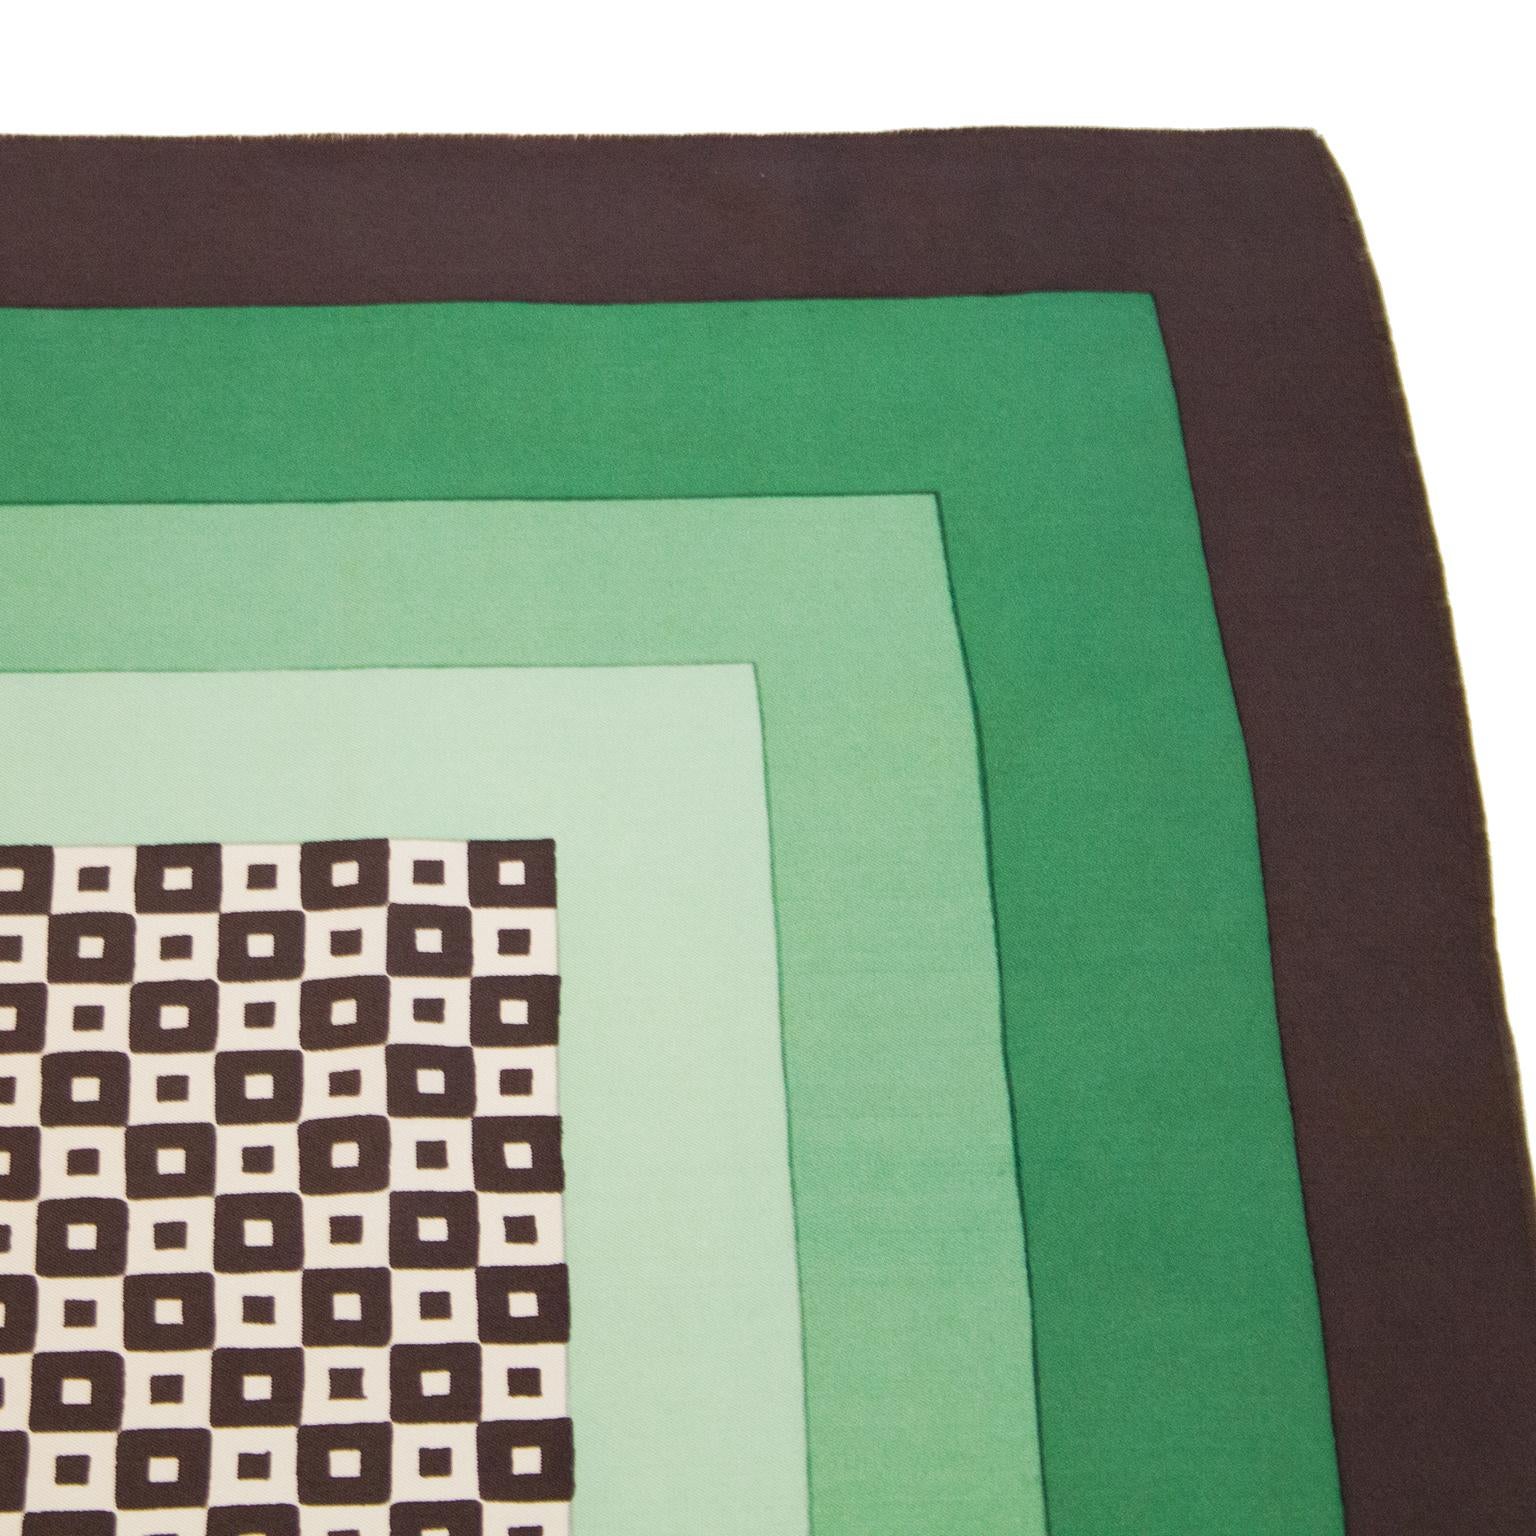 YSL modernist mid century silk scarf from the 1970s. The center is a geometric pattern of brown and beige squares surrounded with 3 borders of gradient green shades and finished with a dark brown border and an unfinished edge. Signed on the bottom